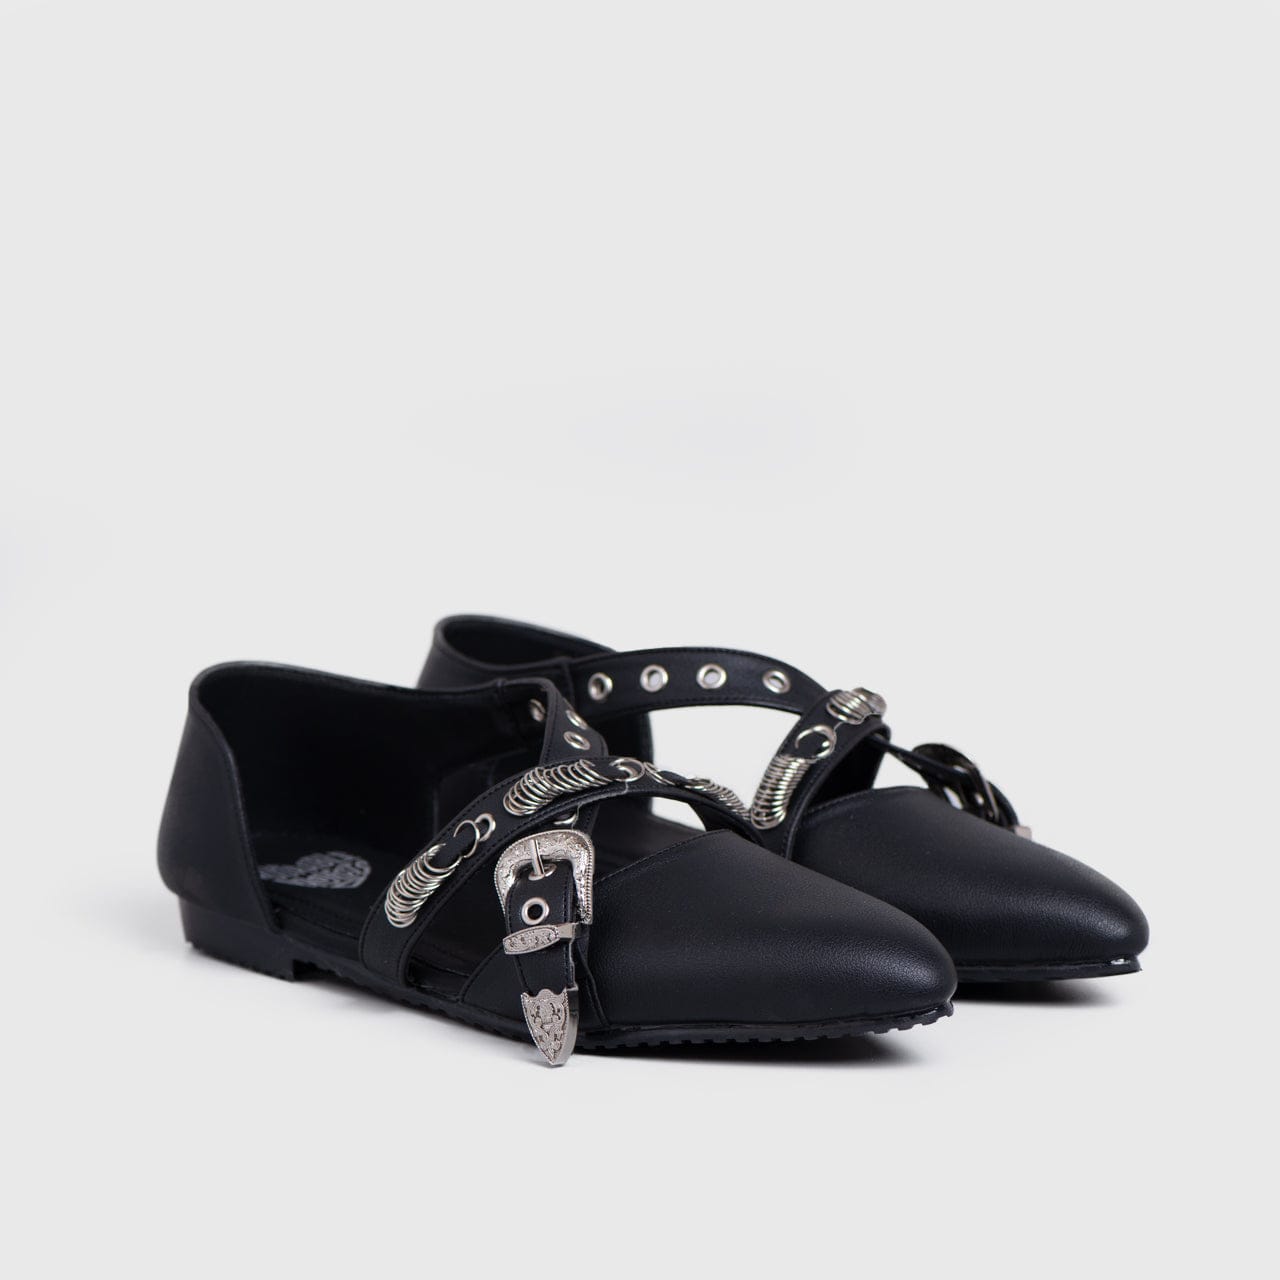 Adorable Projects Official Adorableprojects - Zyline Flat Shoes Black - Sepatu Flat